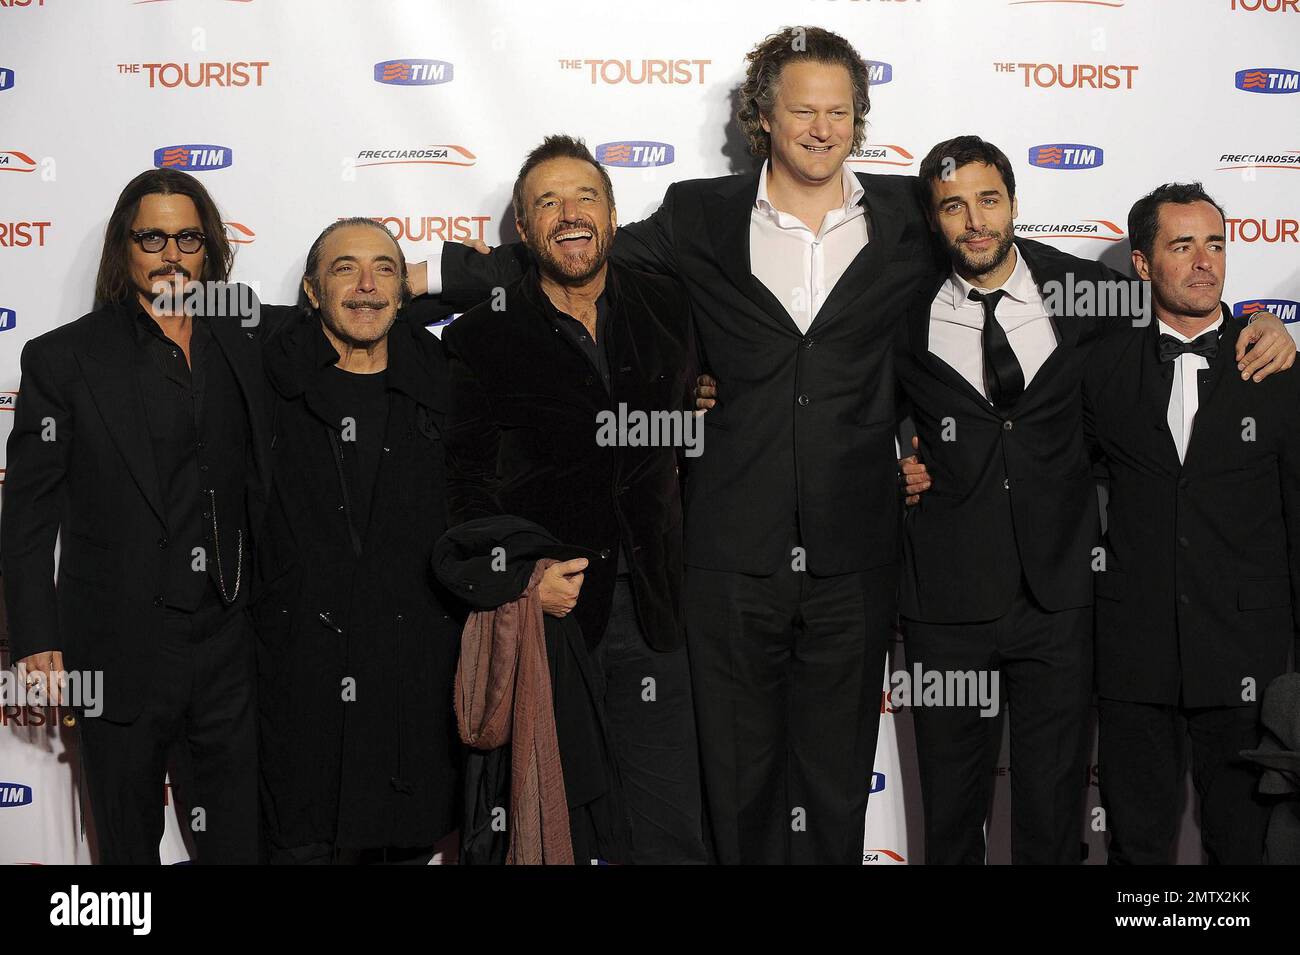 Johnny Depp and cast at the premiere of 'The Tourist' in Rome, Italy. 12/15/10. Stock Photo